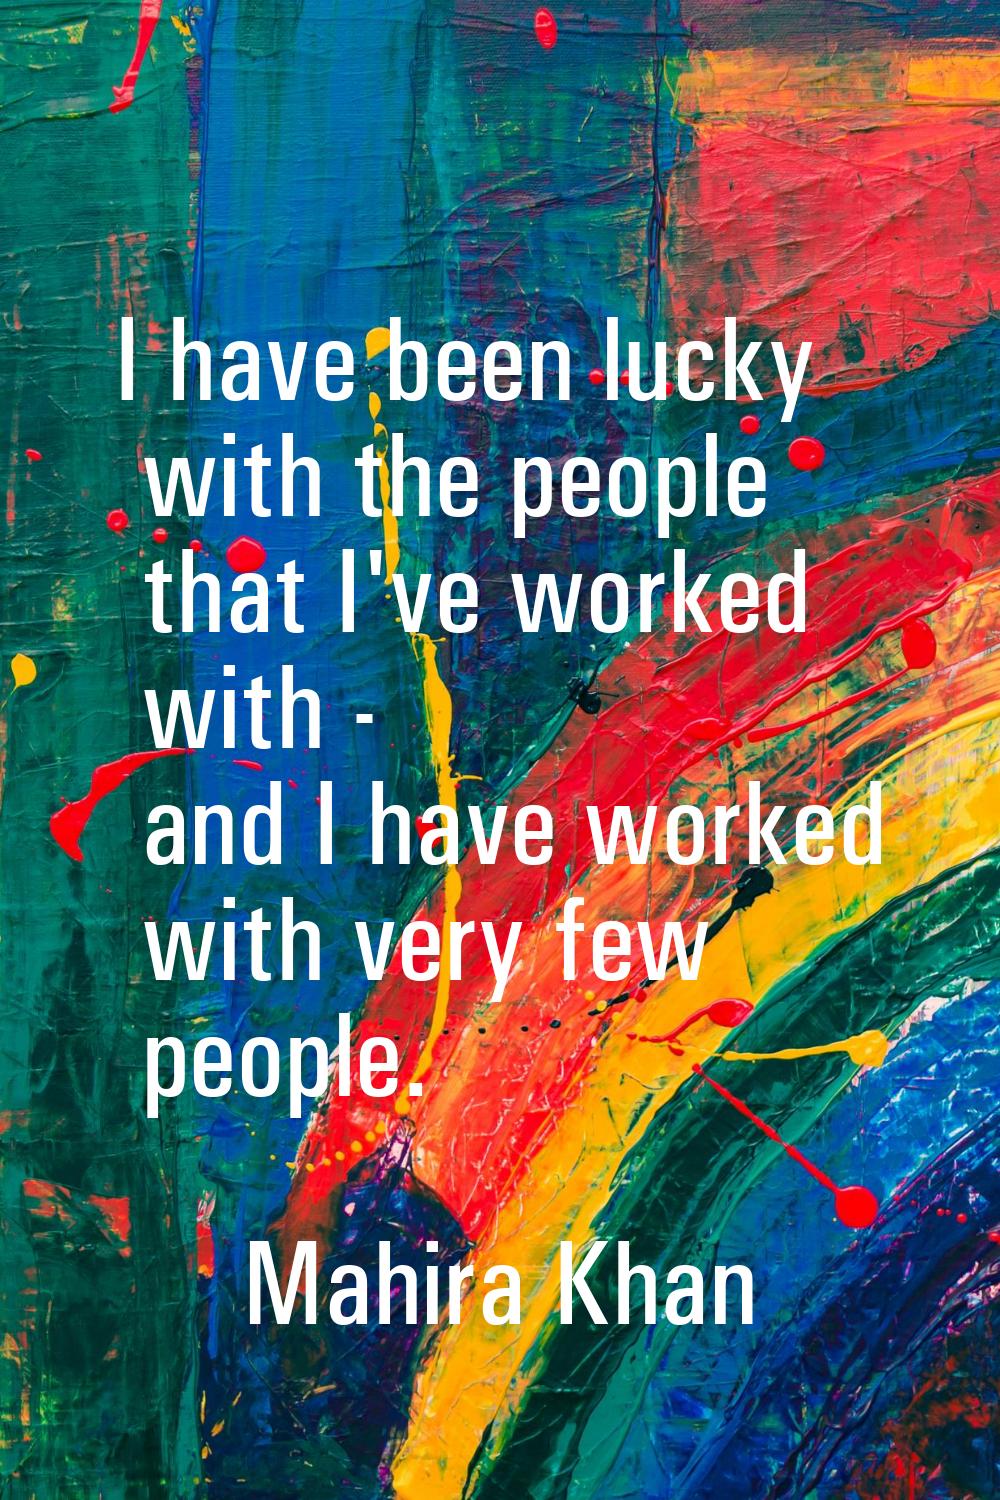 I have been lucky with the people that I've worked with - and I have worked with very few people.